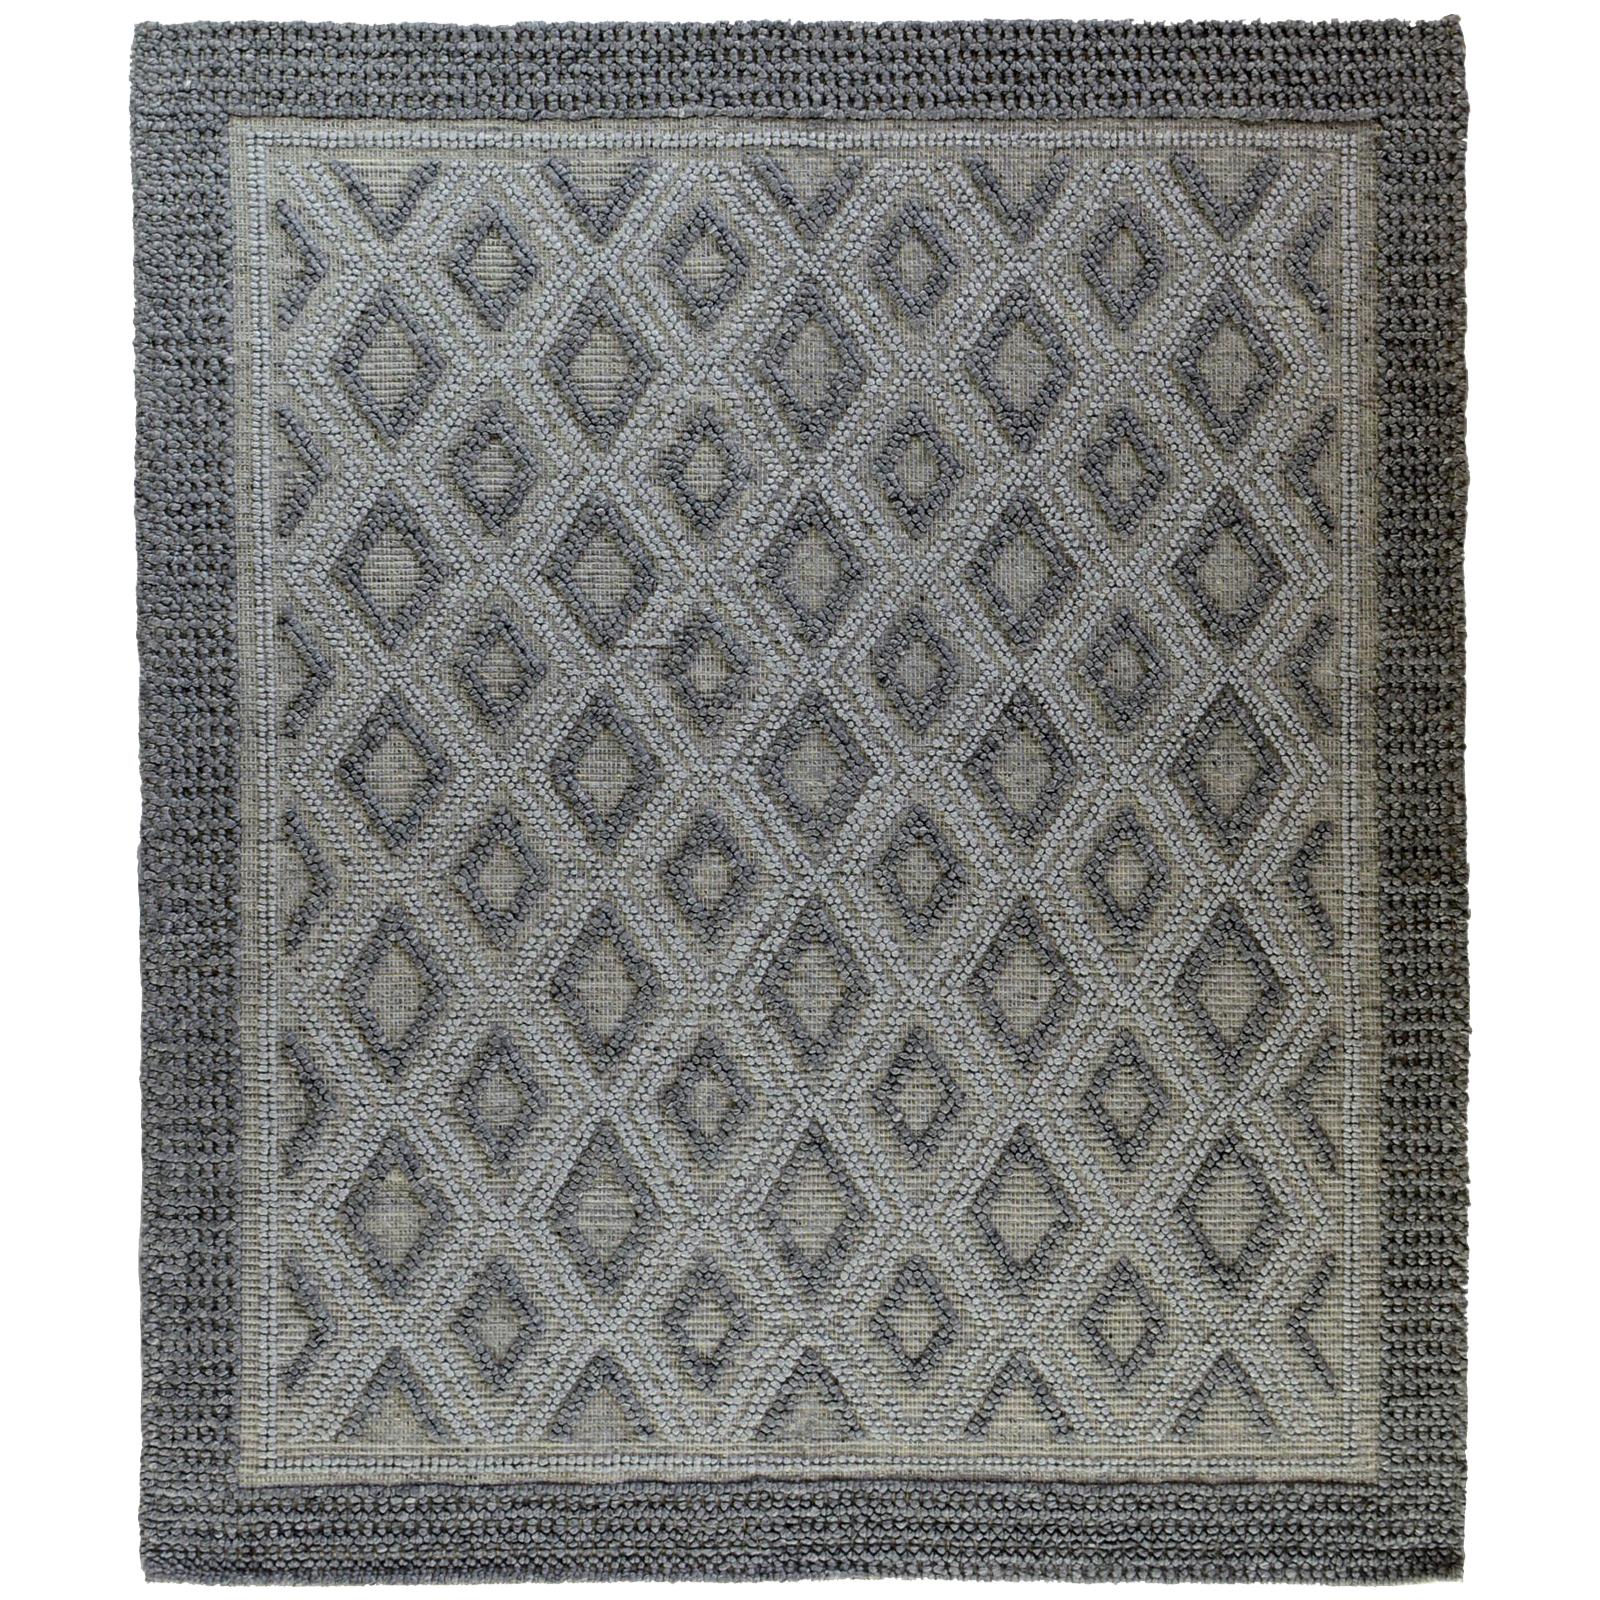 Indian Braided Rug in Black, Gray and Silver For Sale at 1stDibs